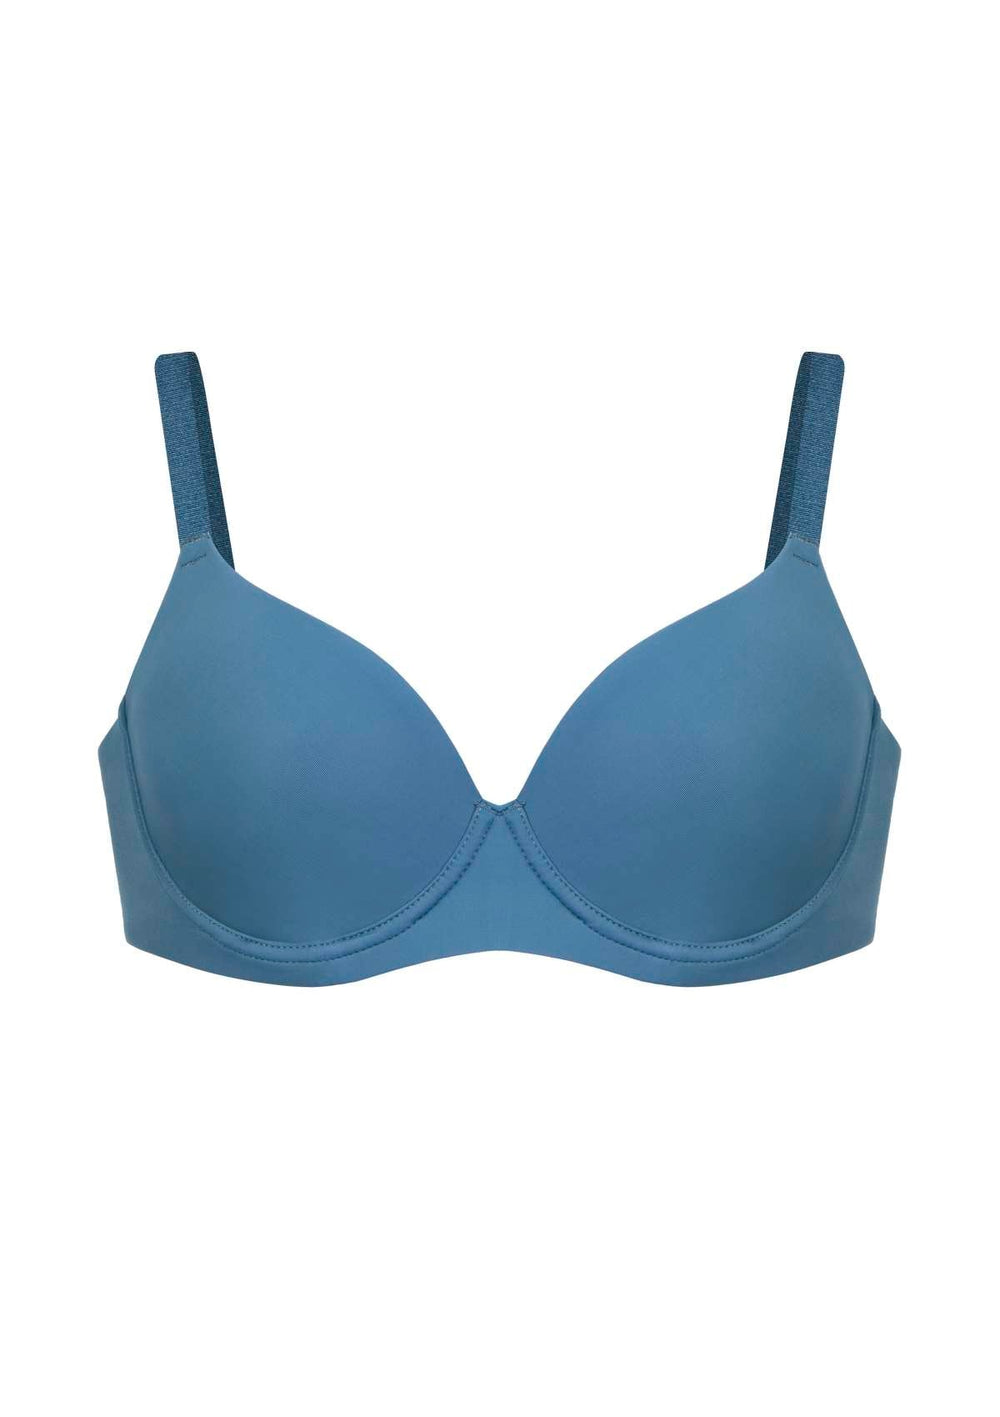 Bras N Things T Shirt Bra Size 10G 32G Moulded Underwire Teal Blue  Microfibre